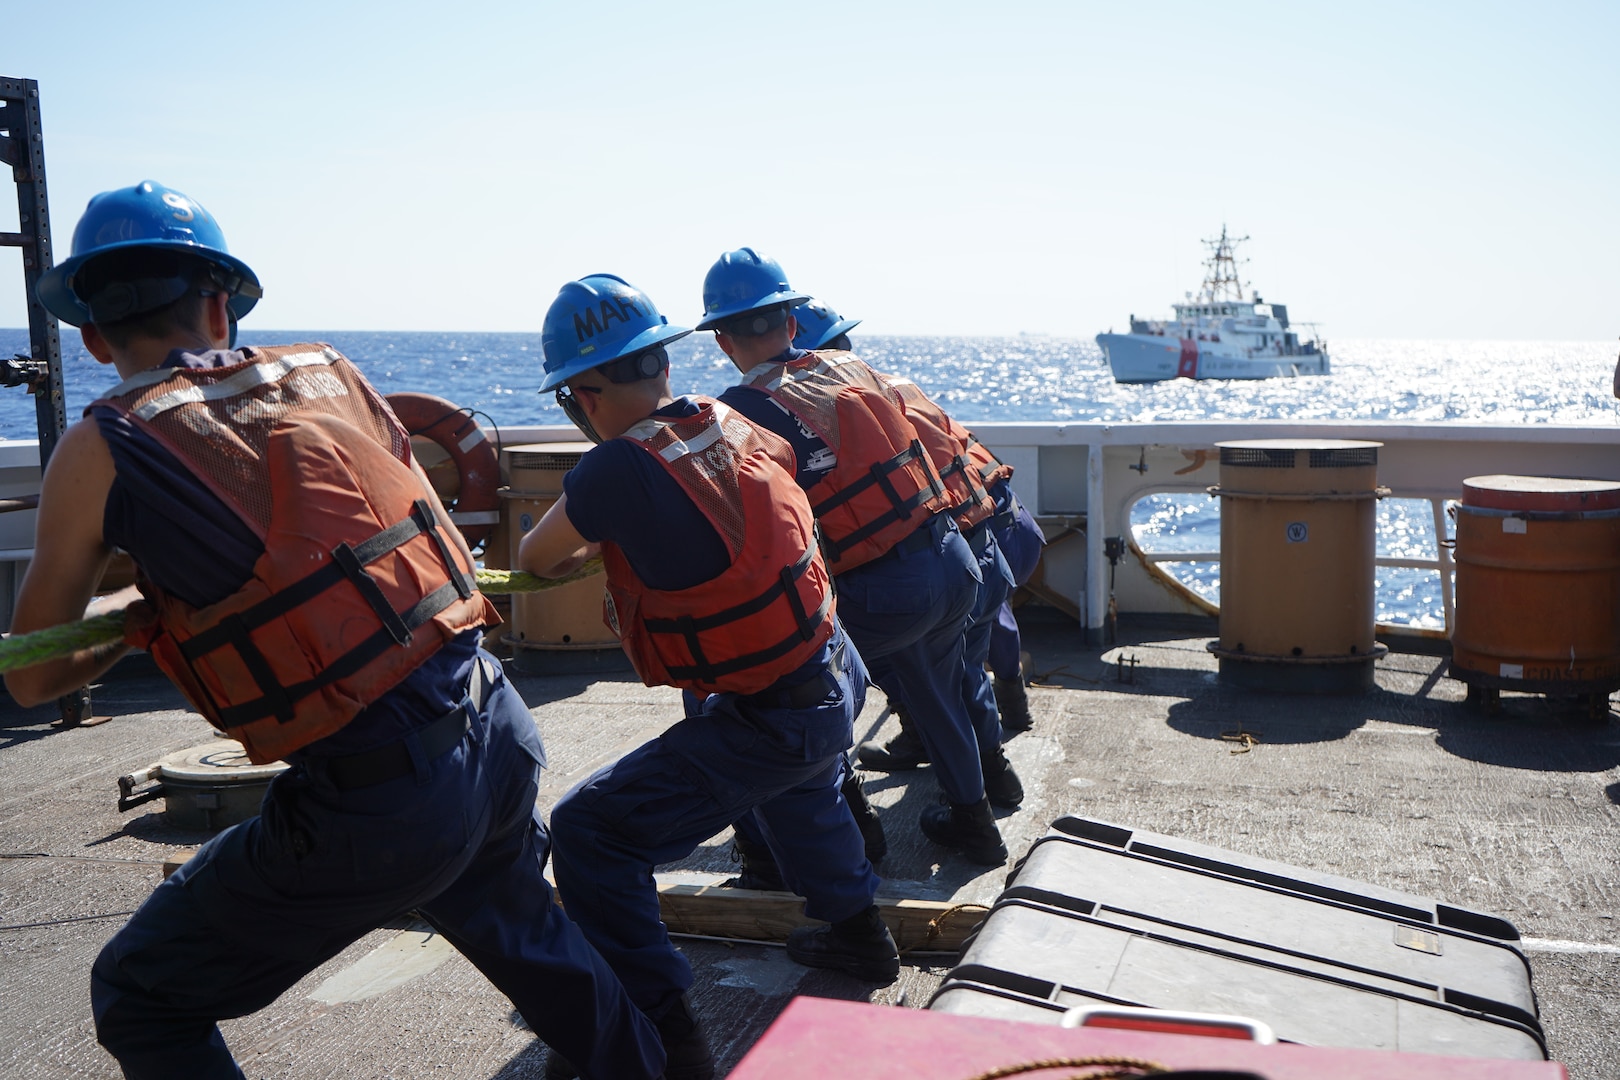 The crew of U.S. Coast Guard Cutter Venturous (WMEC 625) throws a heaving line to the crew of the U.S. Coast Guard Cutter Bernard C. Webber (WPC 1101) during a towing exercise near the Windward Passage, Feb. 28, 2024. Both cutters patrol within the Coast Guard's Seventh District area of responsibility.